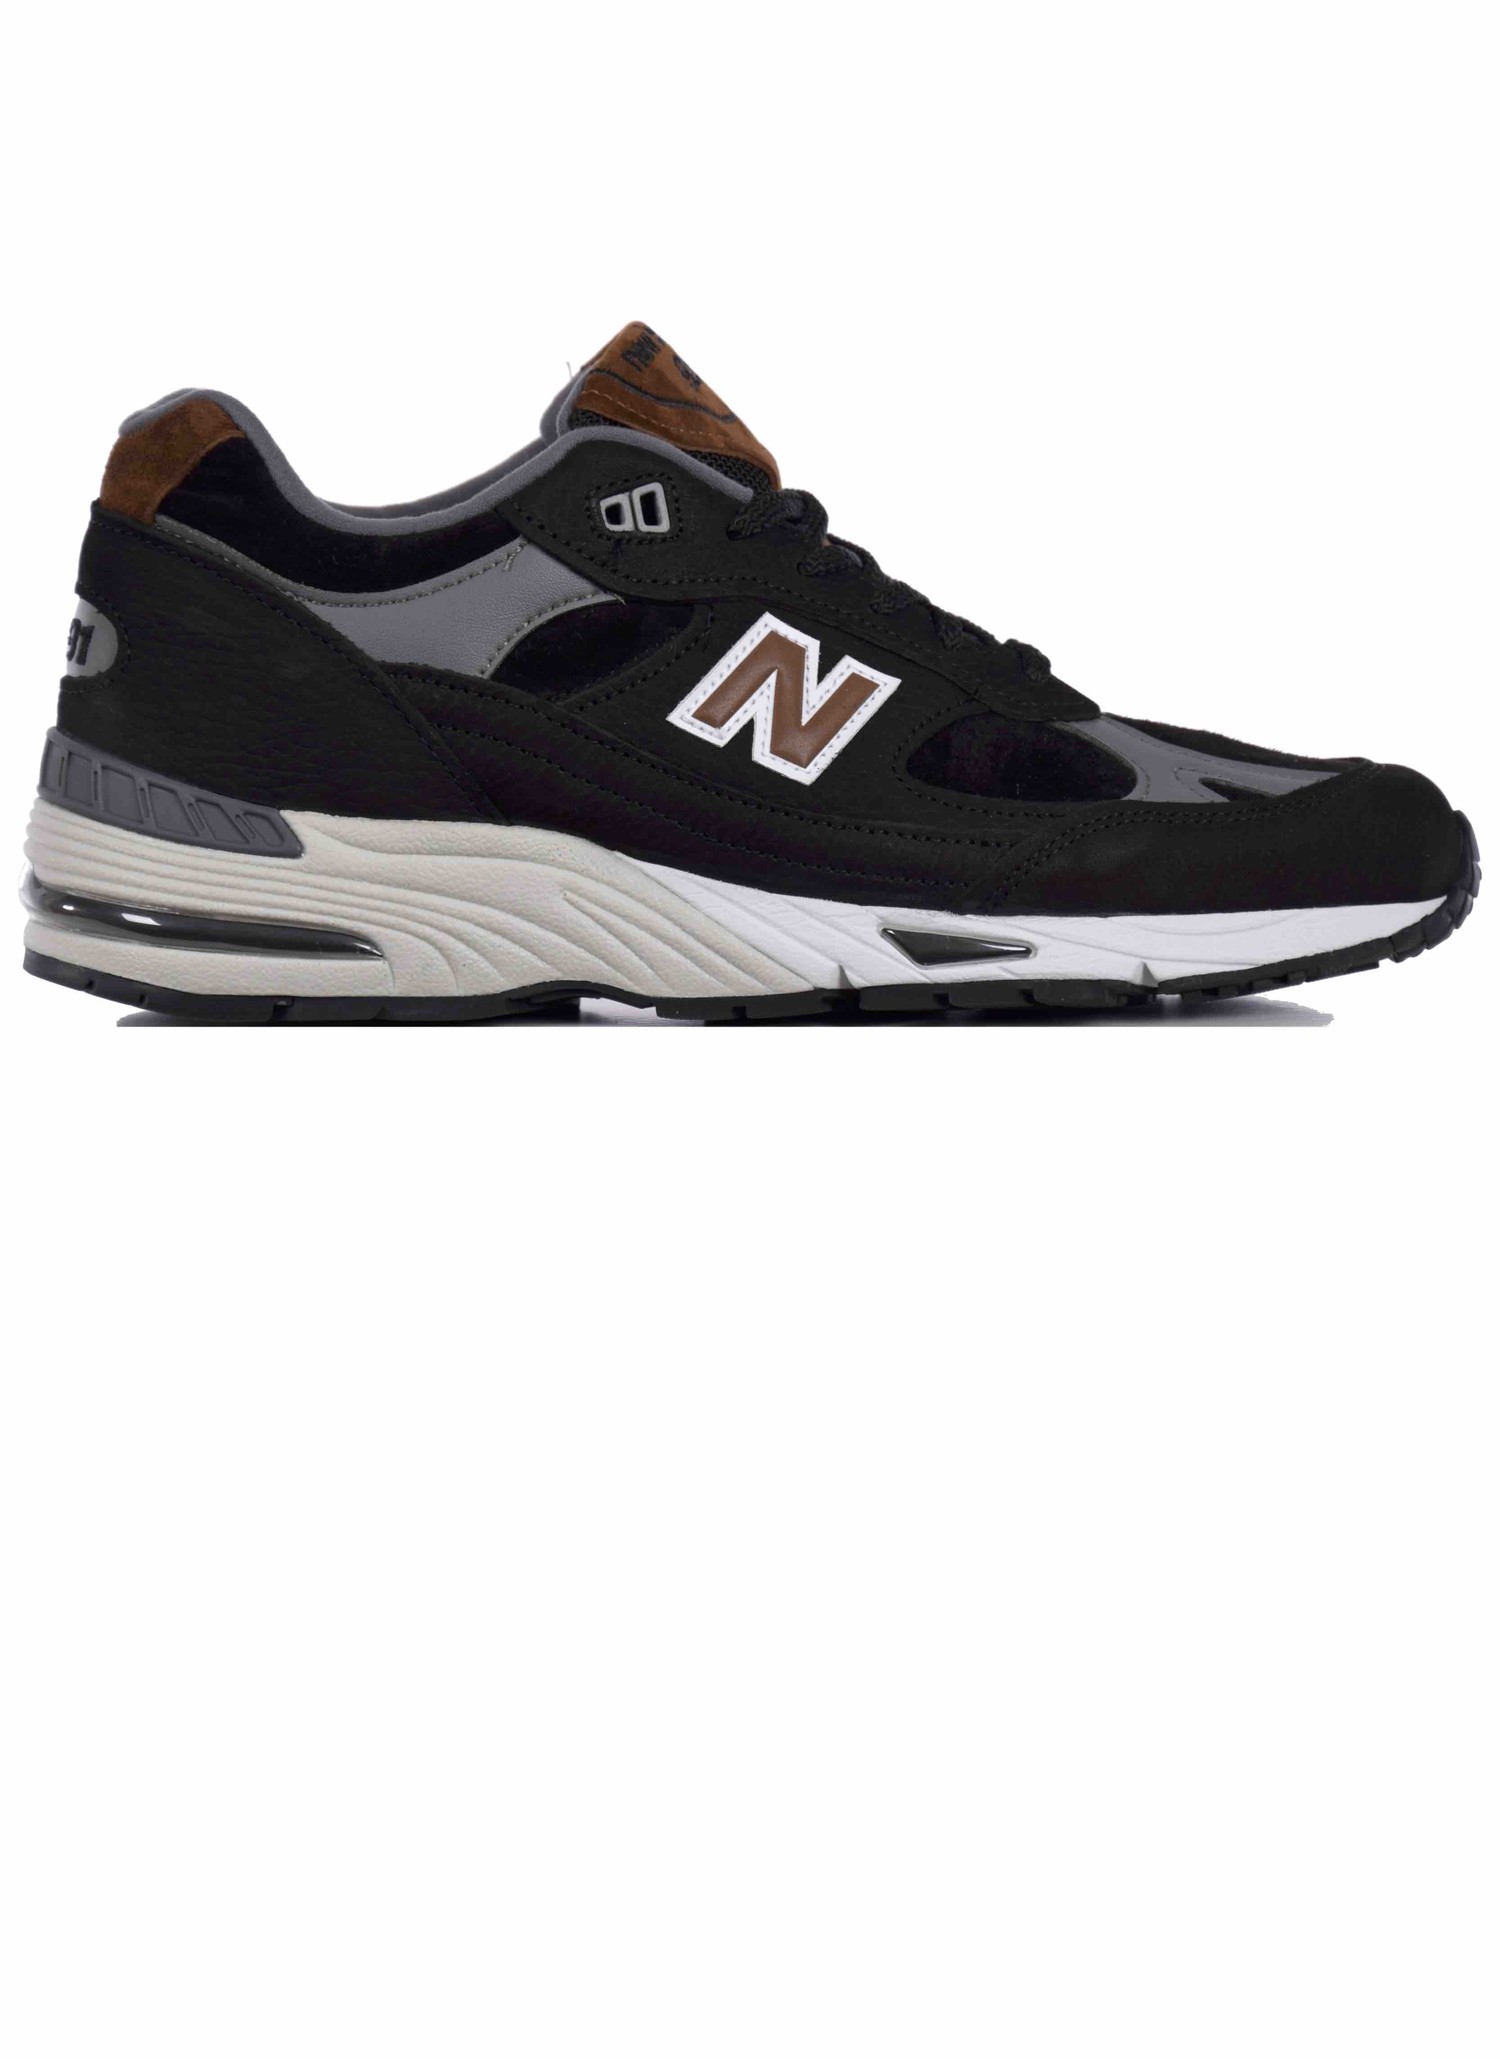 New Balance M991 KT Made in England 